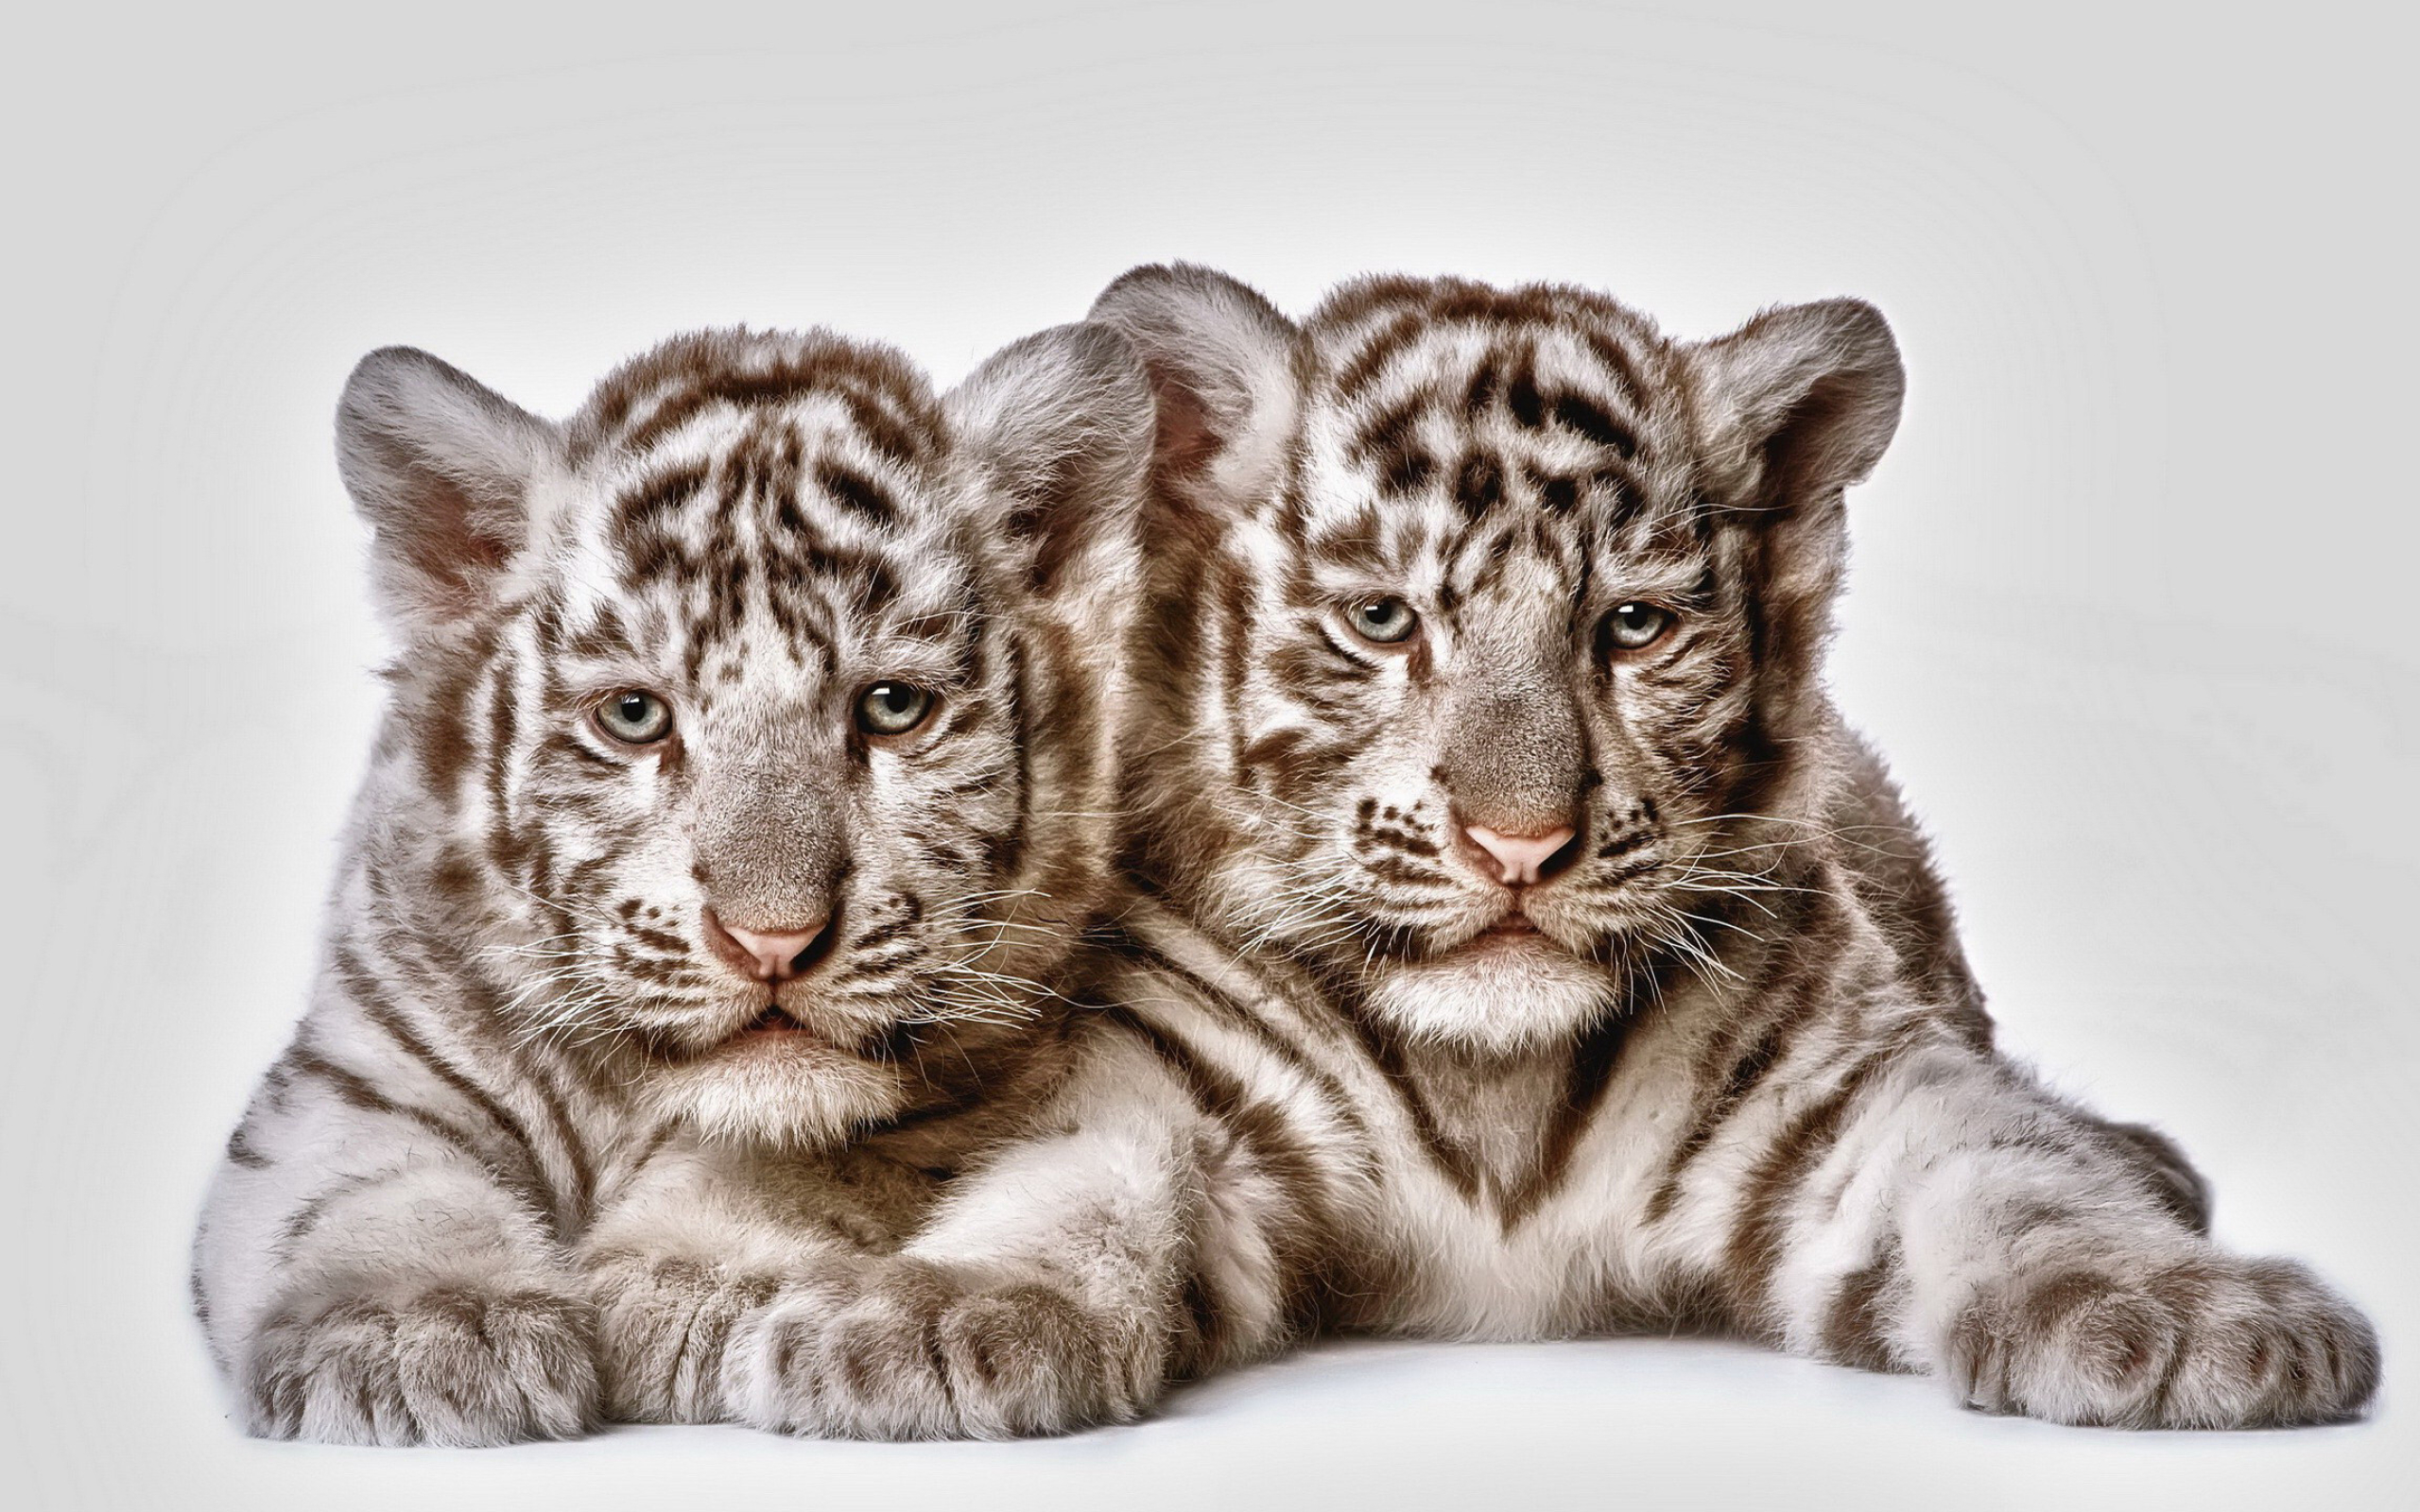 Tiger Cub: The baby of one of only a few striped cat species. 2560x1600 HD Wallpaper.